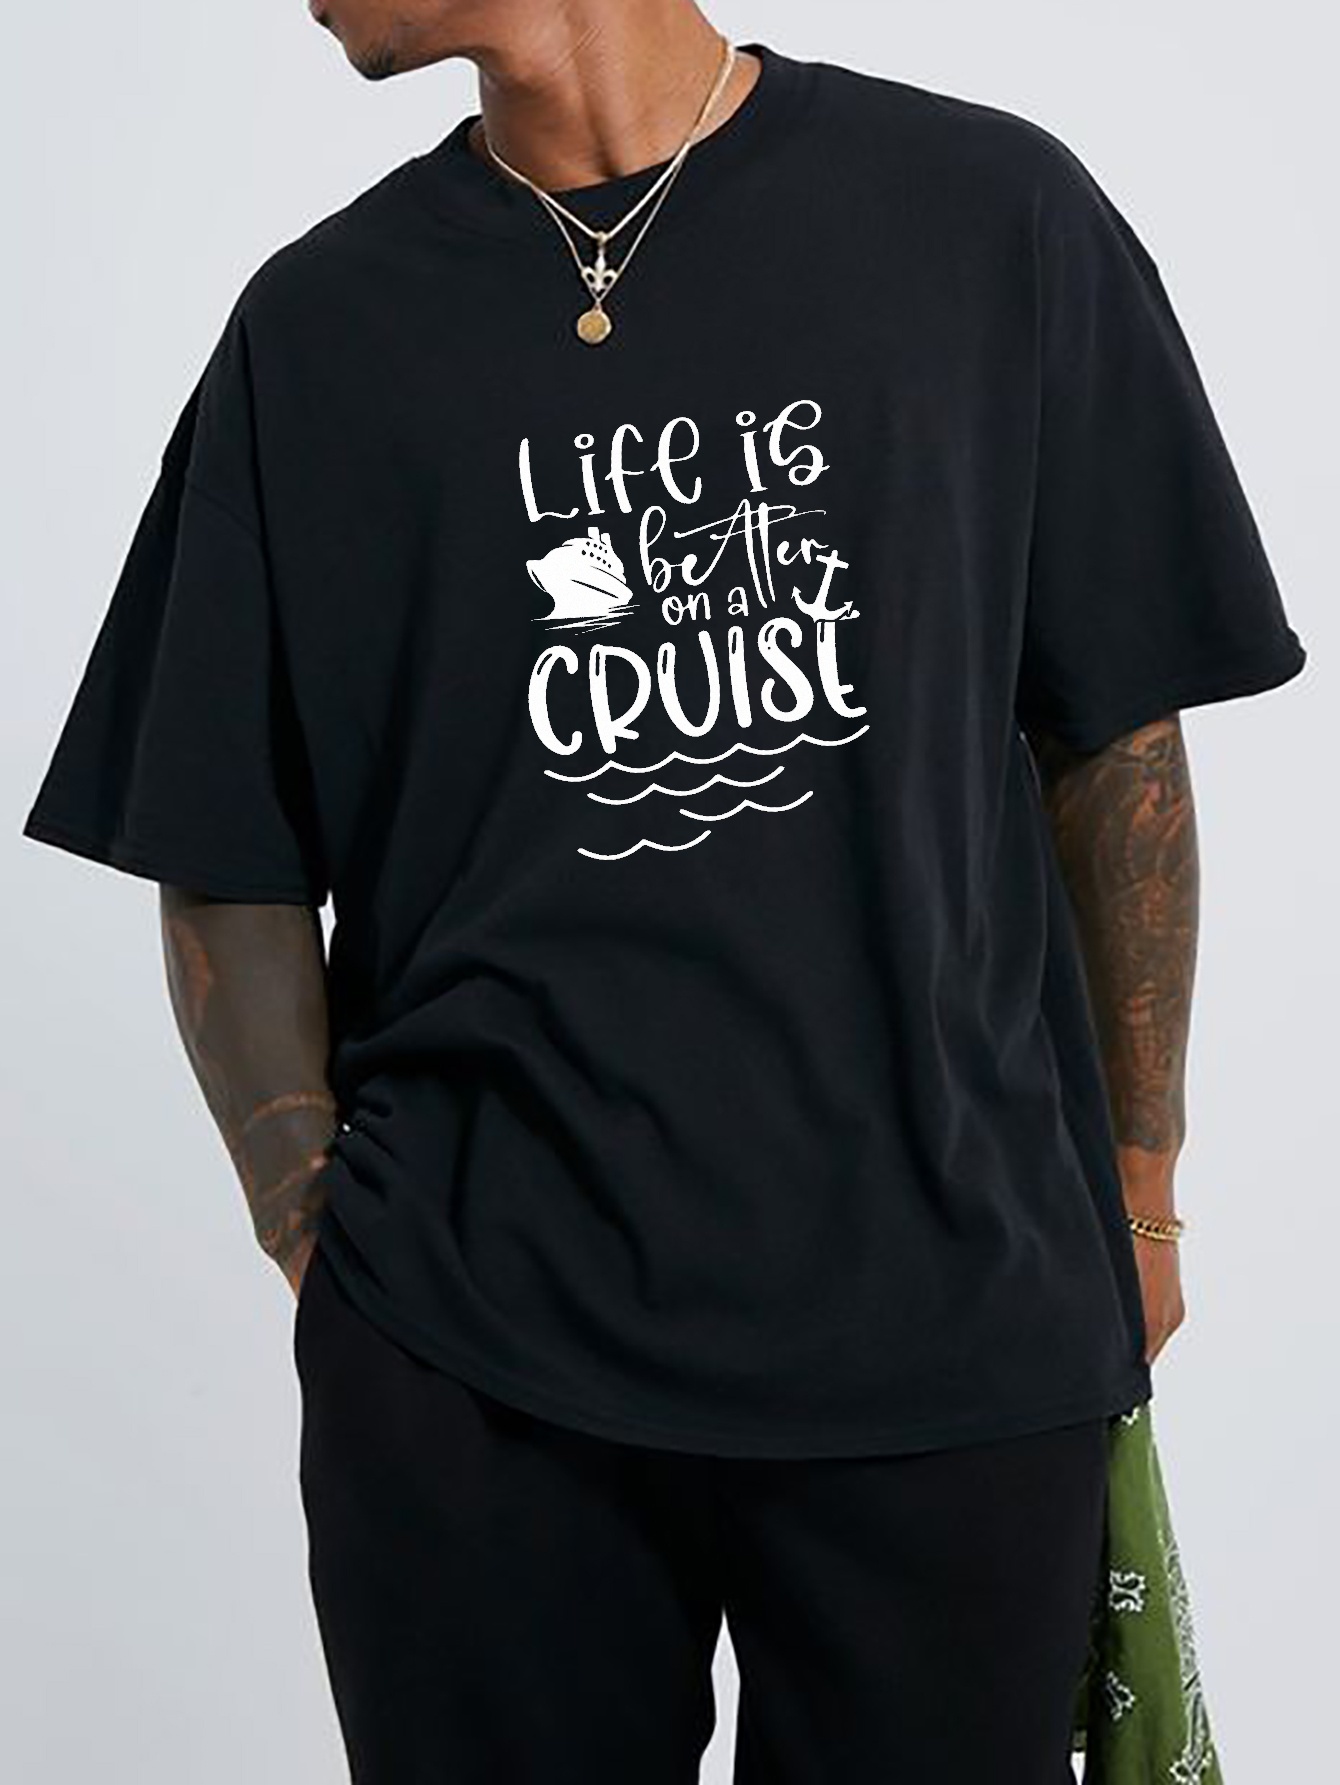 Black and White Graphic Tees for Men, Cotton Linen Top Mens Cruise Shirts  Men's Short Sleeve Shirts with Pockets Fishing T Shirts for Men